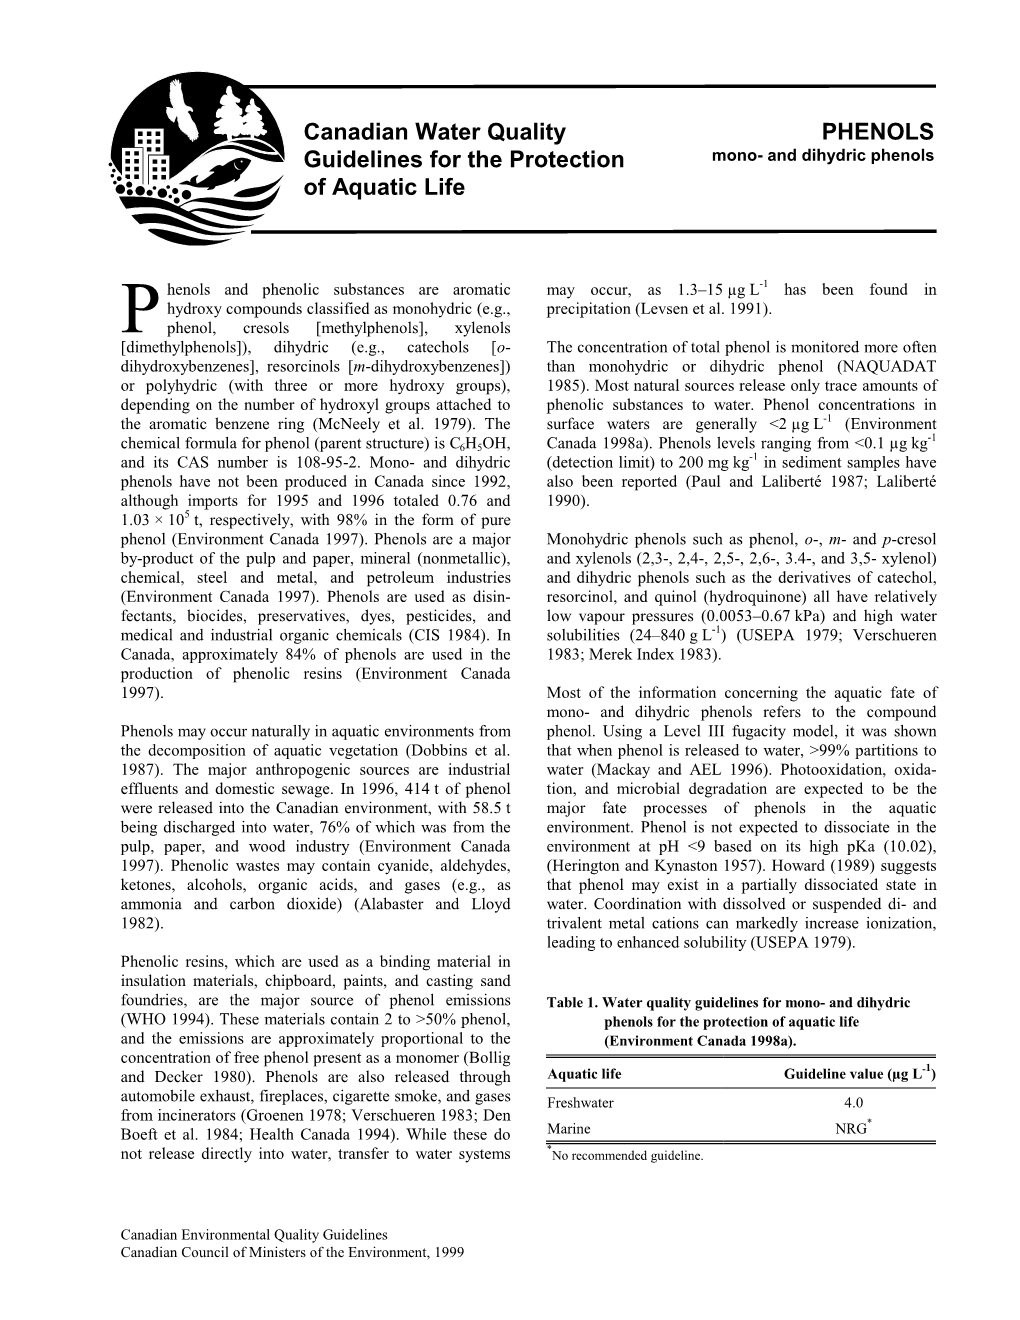 PHENOLS Guidelines for the Protection Mono- and Dihydric Phenols of Aquatic Life